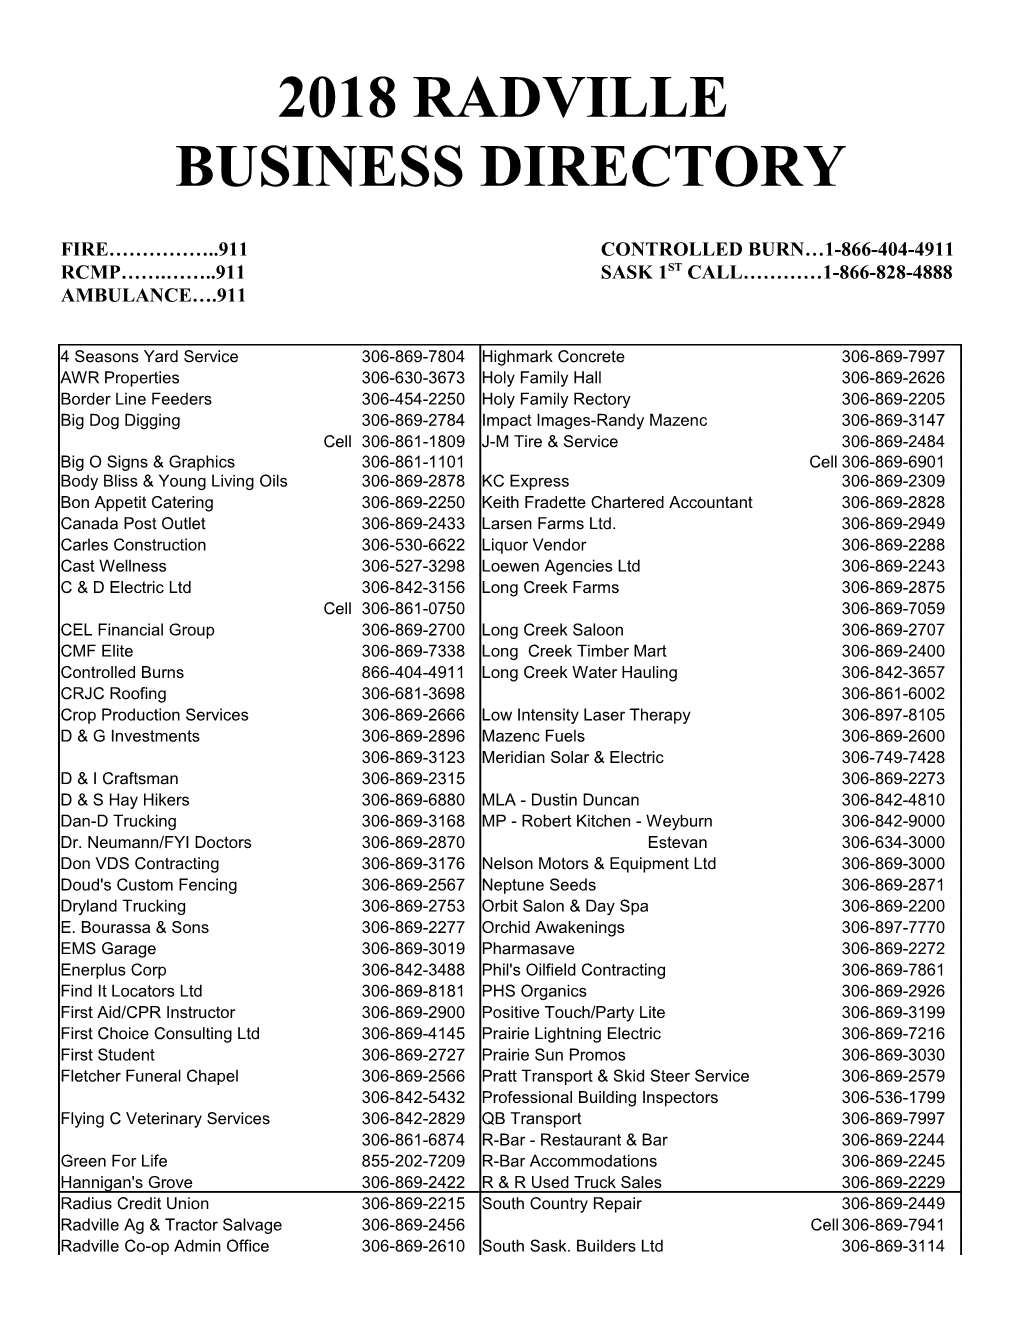 2016 Radville Business Directory